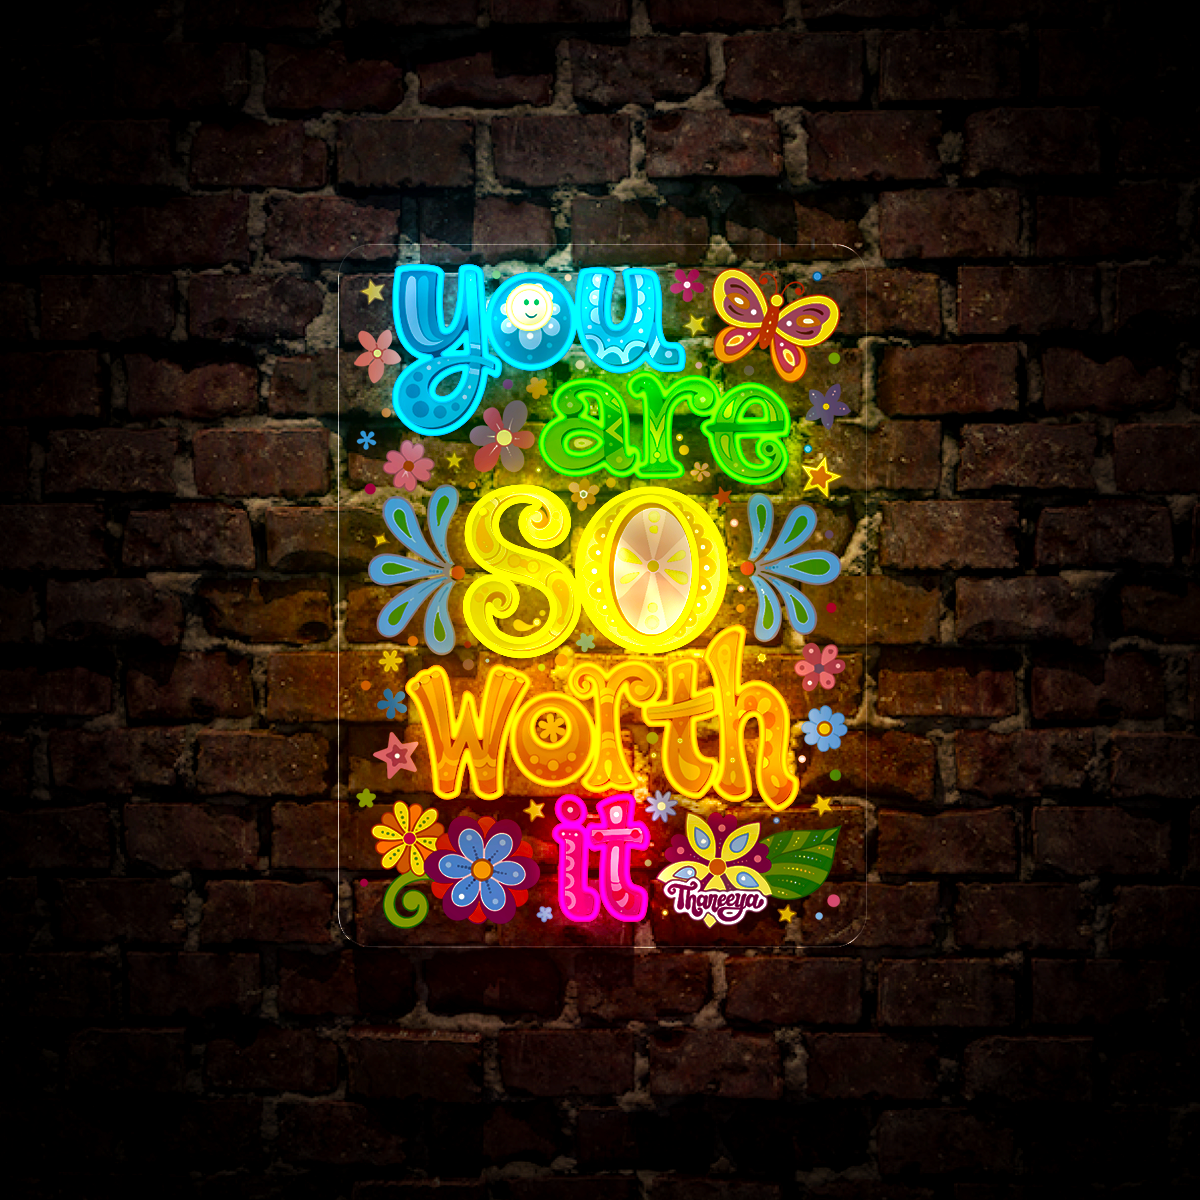 You Are So Worth It Artwork Neon Sign